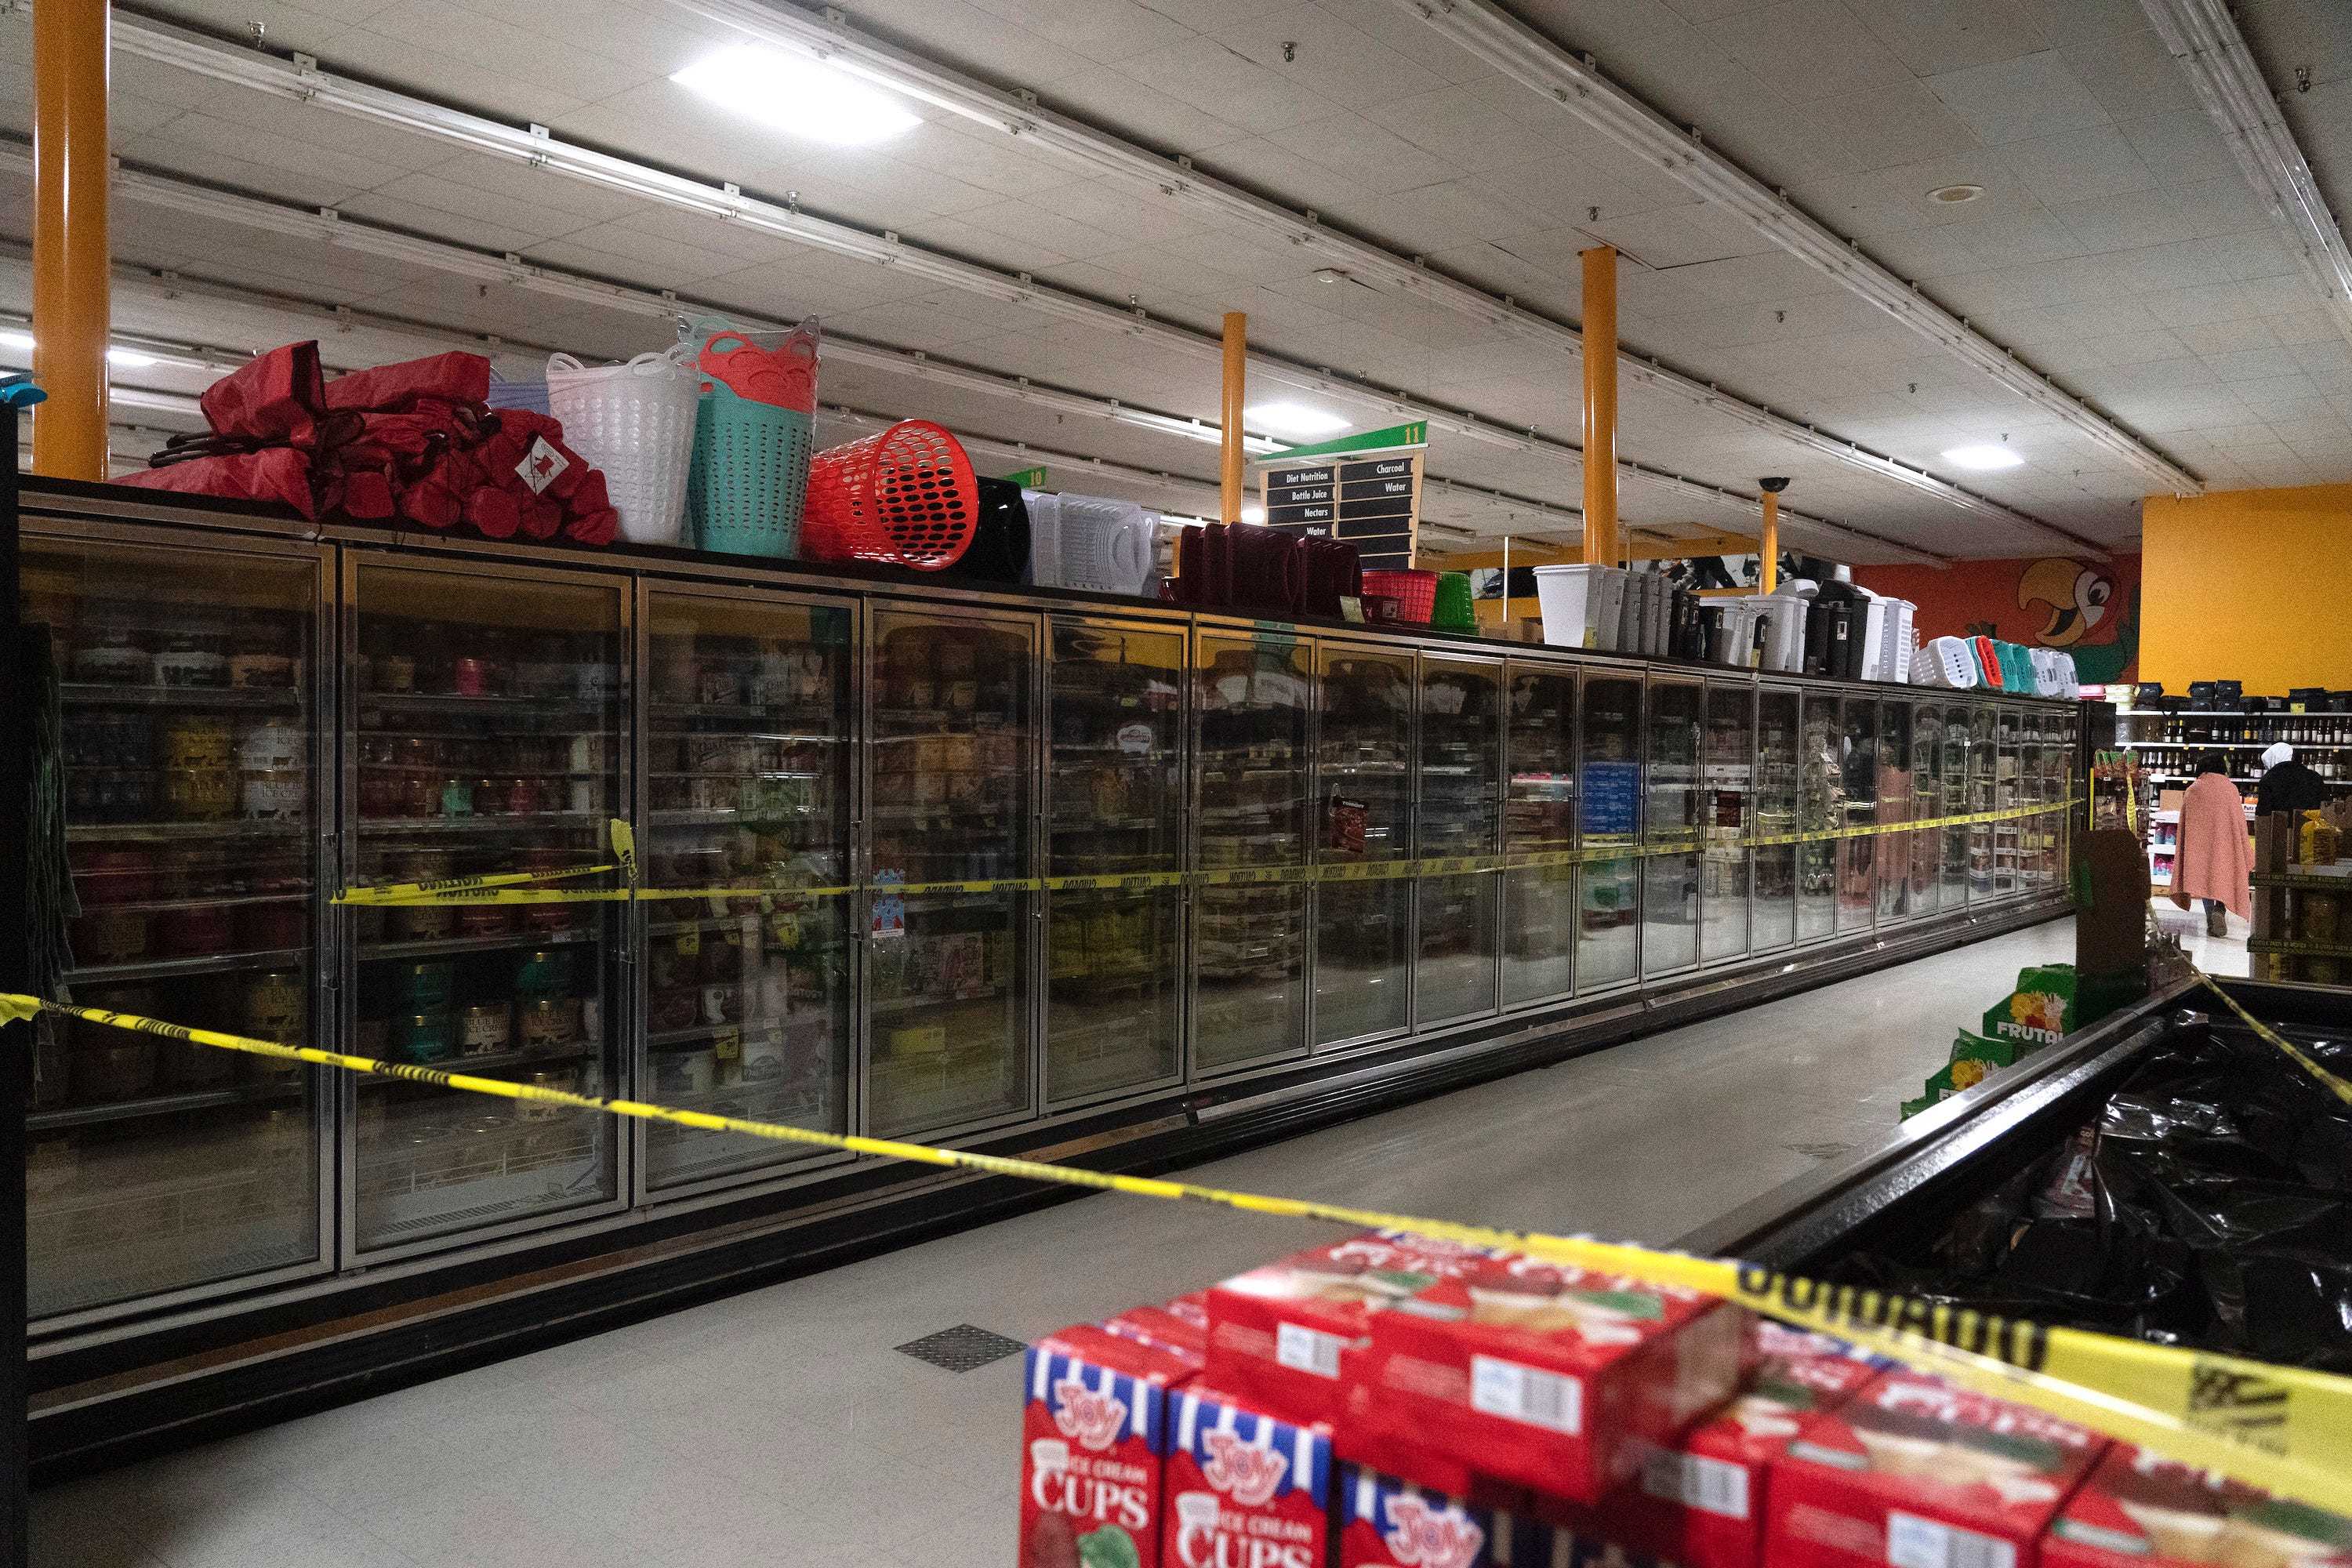 Freezer sections are closed off in Fiesta supermarket on February 16, 2021 in Houston, Texas.